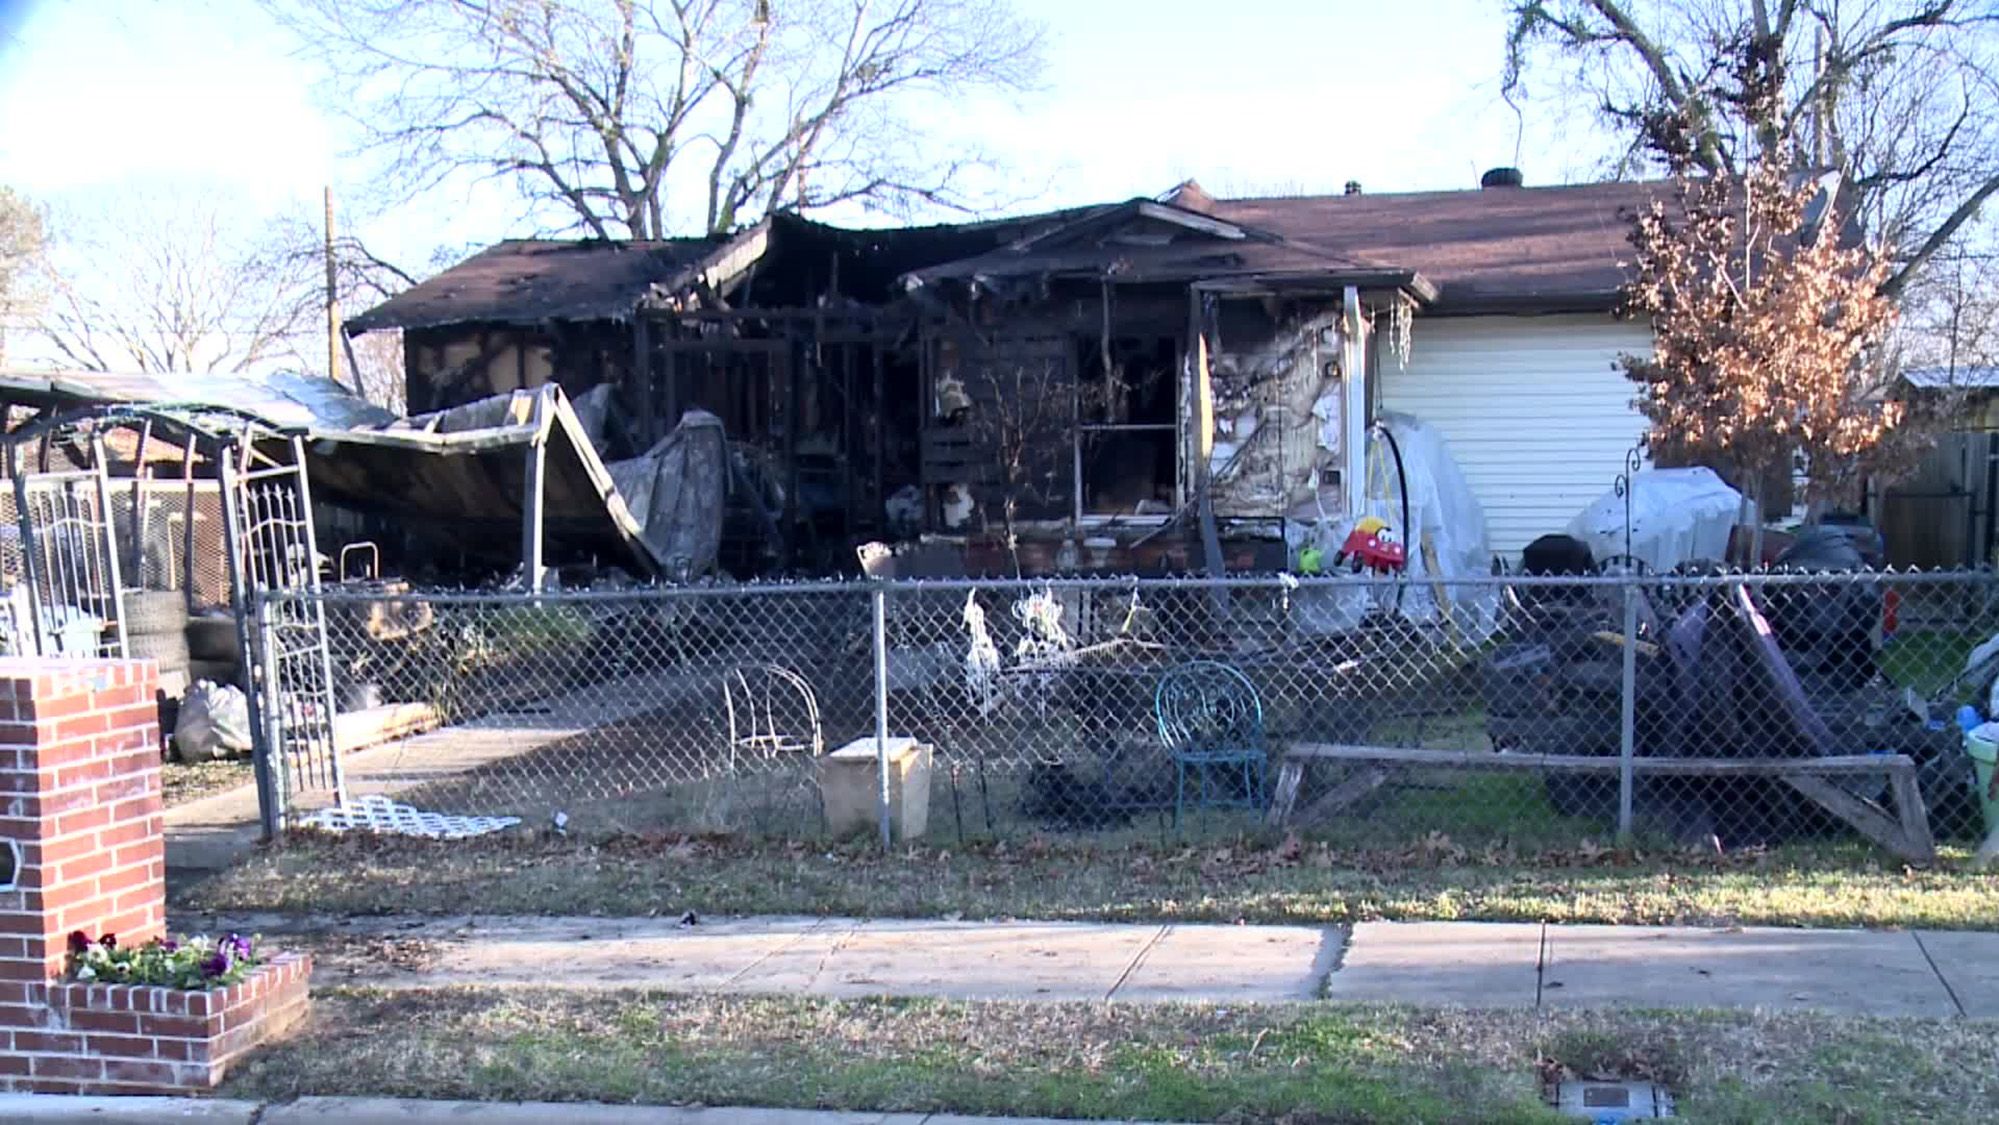 The family's home was a total loss, CNN affiliate KWTX reported.